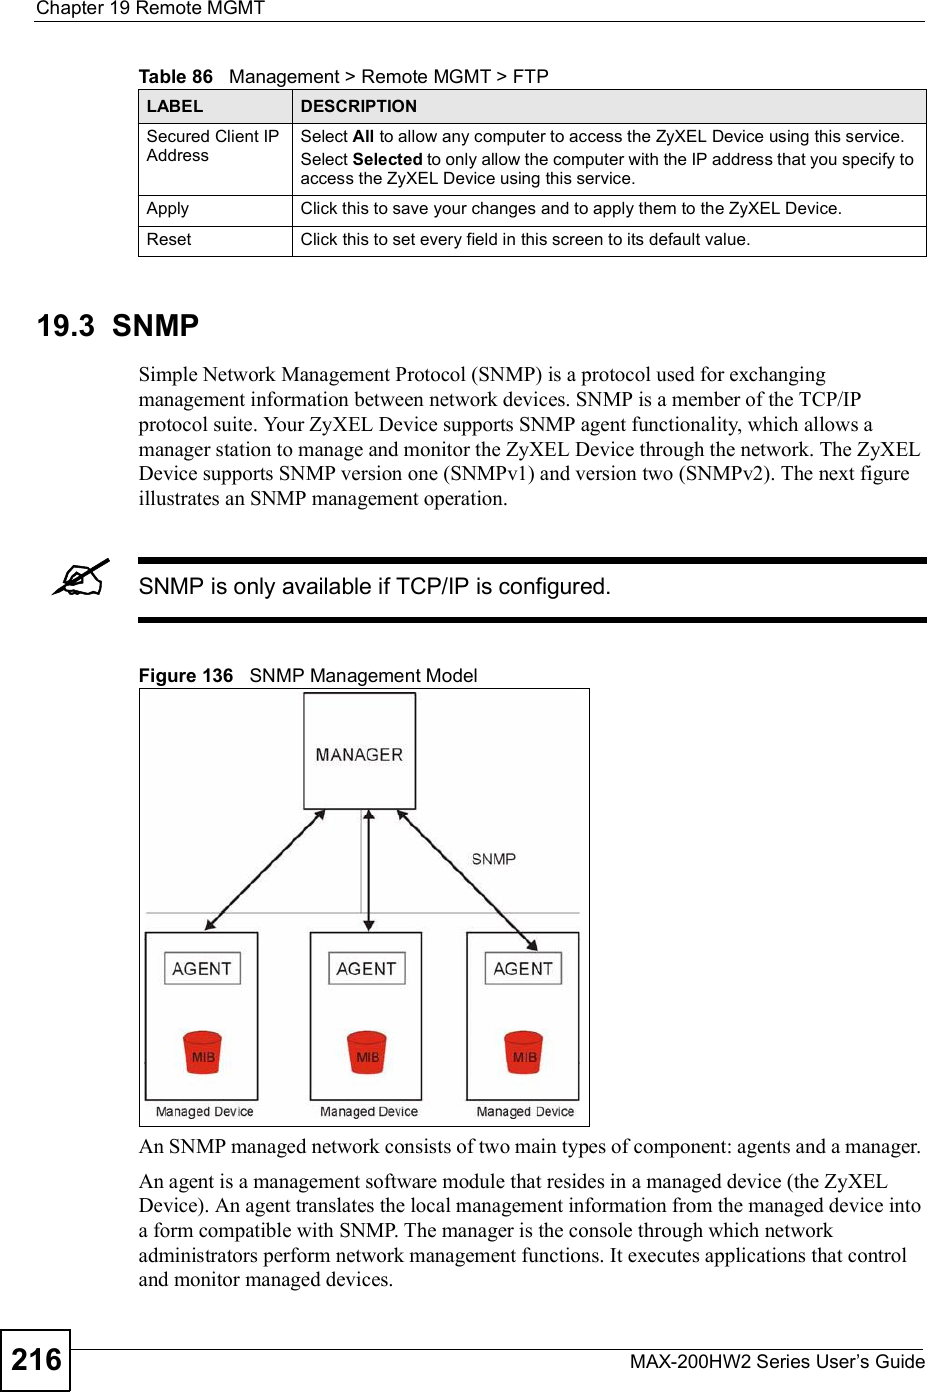 Chapter 19Remote MGMTMAX-200HW2 Series User s Guide21619.3  SNMPSimple Network Management Protocol (SNMP) is a protocol used for exchanging management information between network devices. SNMP is a member of the TCP/IP protocol suite. Your ZyXEL Device supports SNMP agent functionality, which allows a manager station to manage and monitor the ZyXEL Device through the network. The ZyXEL Device supports SNMP version one (SNMPv1) and version two (SNMPv2). The next figure illustrates an SNMP management operation.SNMP is only available if TCP/IP is configured.Figure 136   SNMP Management ModelAn SNMP managed network consists of two main types of component: agents and a manager. An agent is a management software module that resides in a managed device (the ZyXEL Device). An agent translates the local management information from the managed device into a form compatible with SNMP. The manager is the console through which network administrators perform network management functions. It executes applications that control and monitor managed devices. Secured Client IP AddressSelect All to allow any computer to access the ZyXEL Device using this service.Select Selected to only allow the computer with the IP address that you specify to access the ZyXEL Device using this service.Apply Click this to save your changes and to apply them to the ZyXEL Device.Reset Click this to set every field in this screen to its default value.Table 86   Management &gt; Remote MGMT &gt; FTPLABEL DESCRIPTION